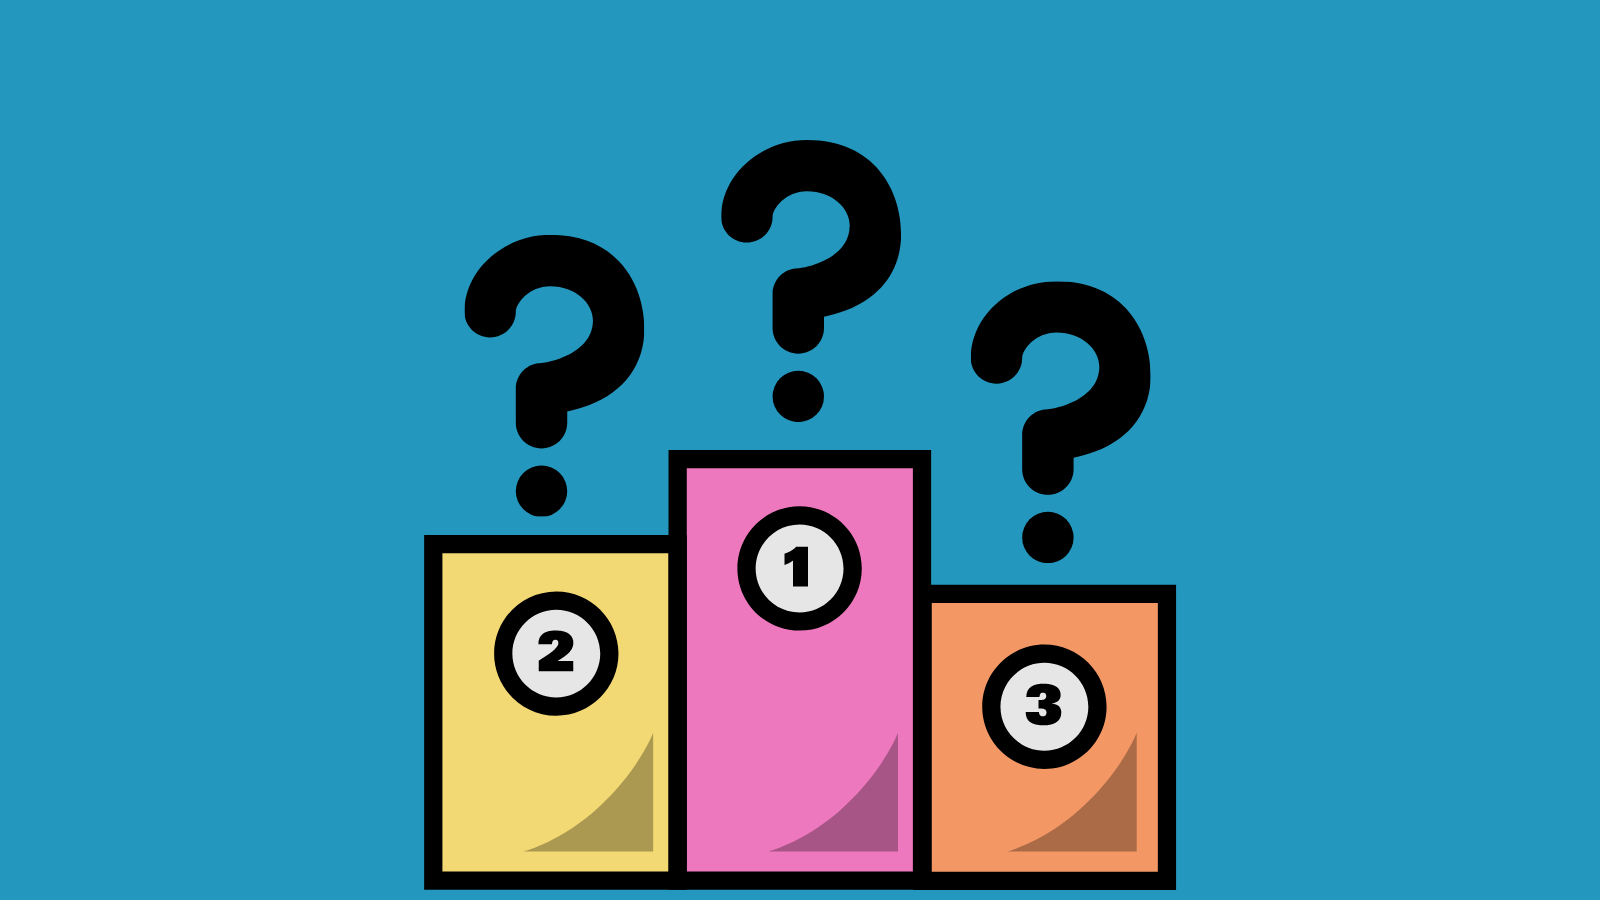 A sports placement podium with question marks at each stage